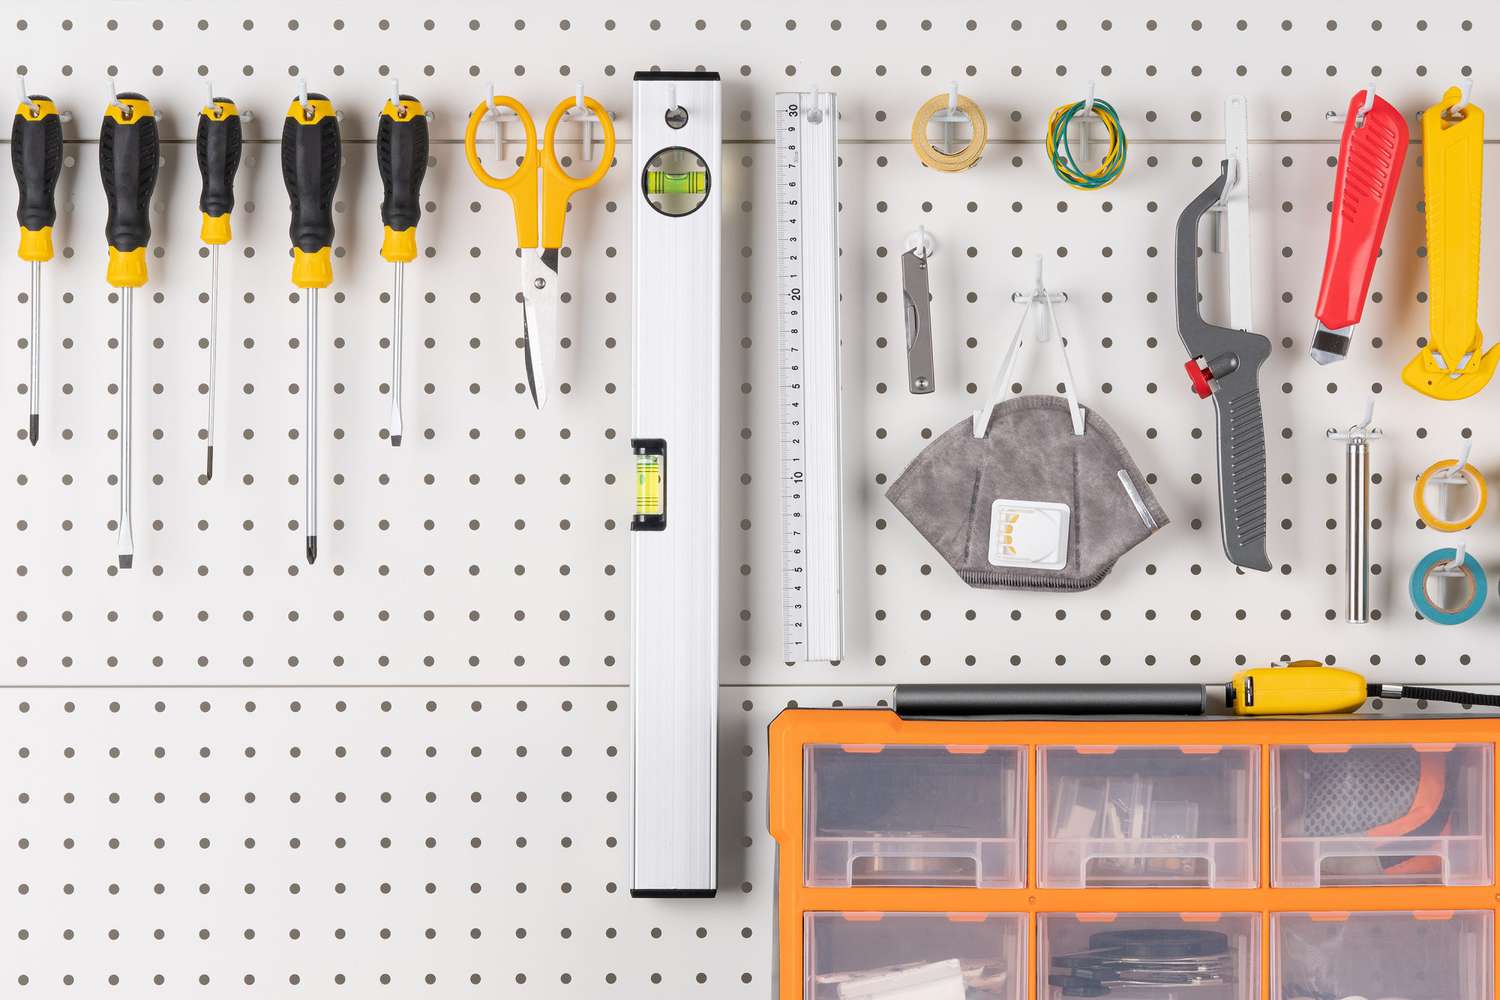 Tool Organization Using a Pegboard and Drawers